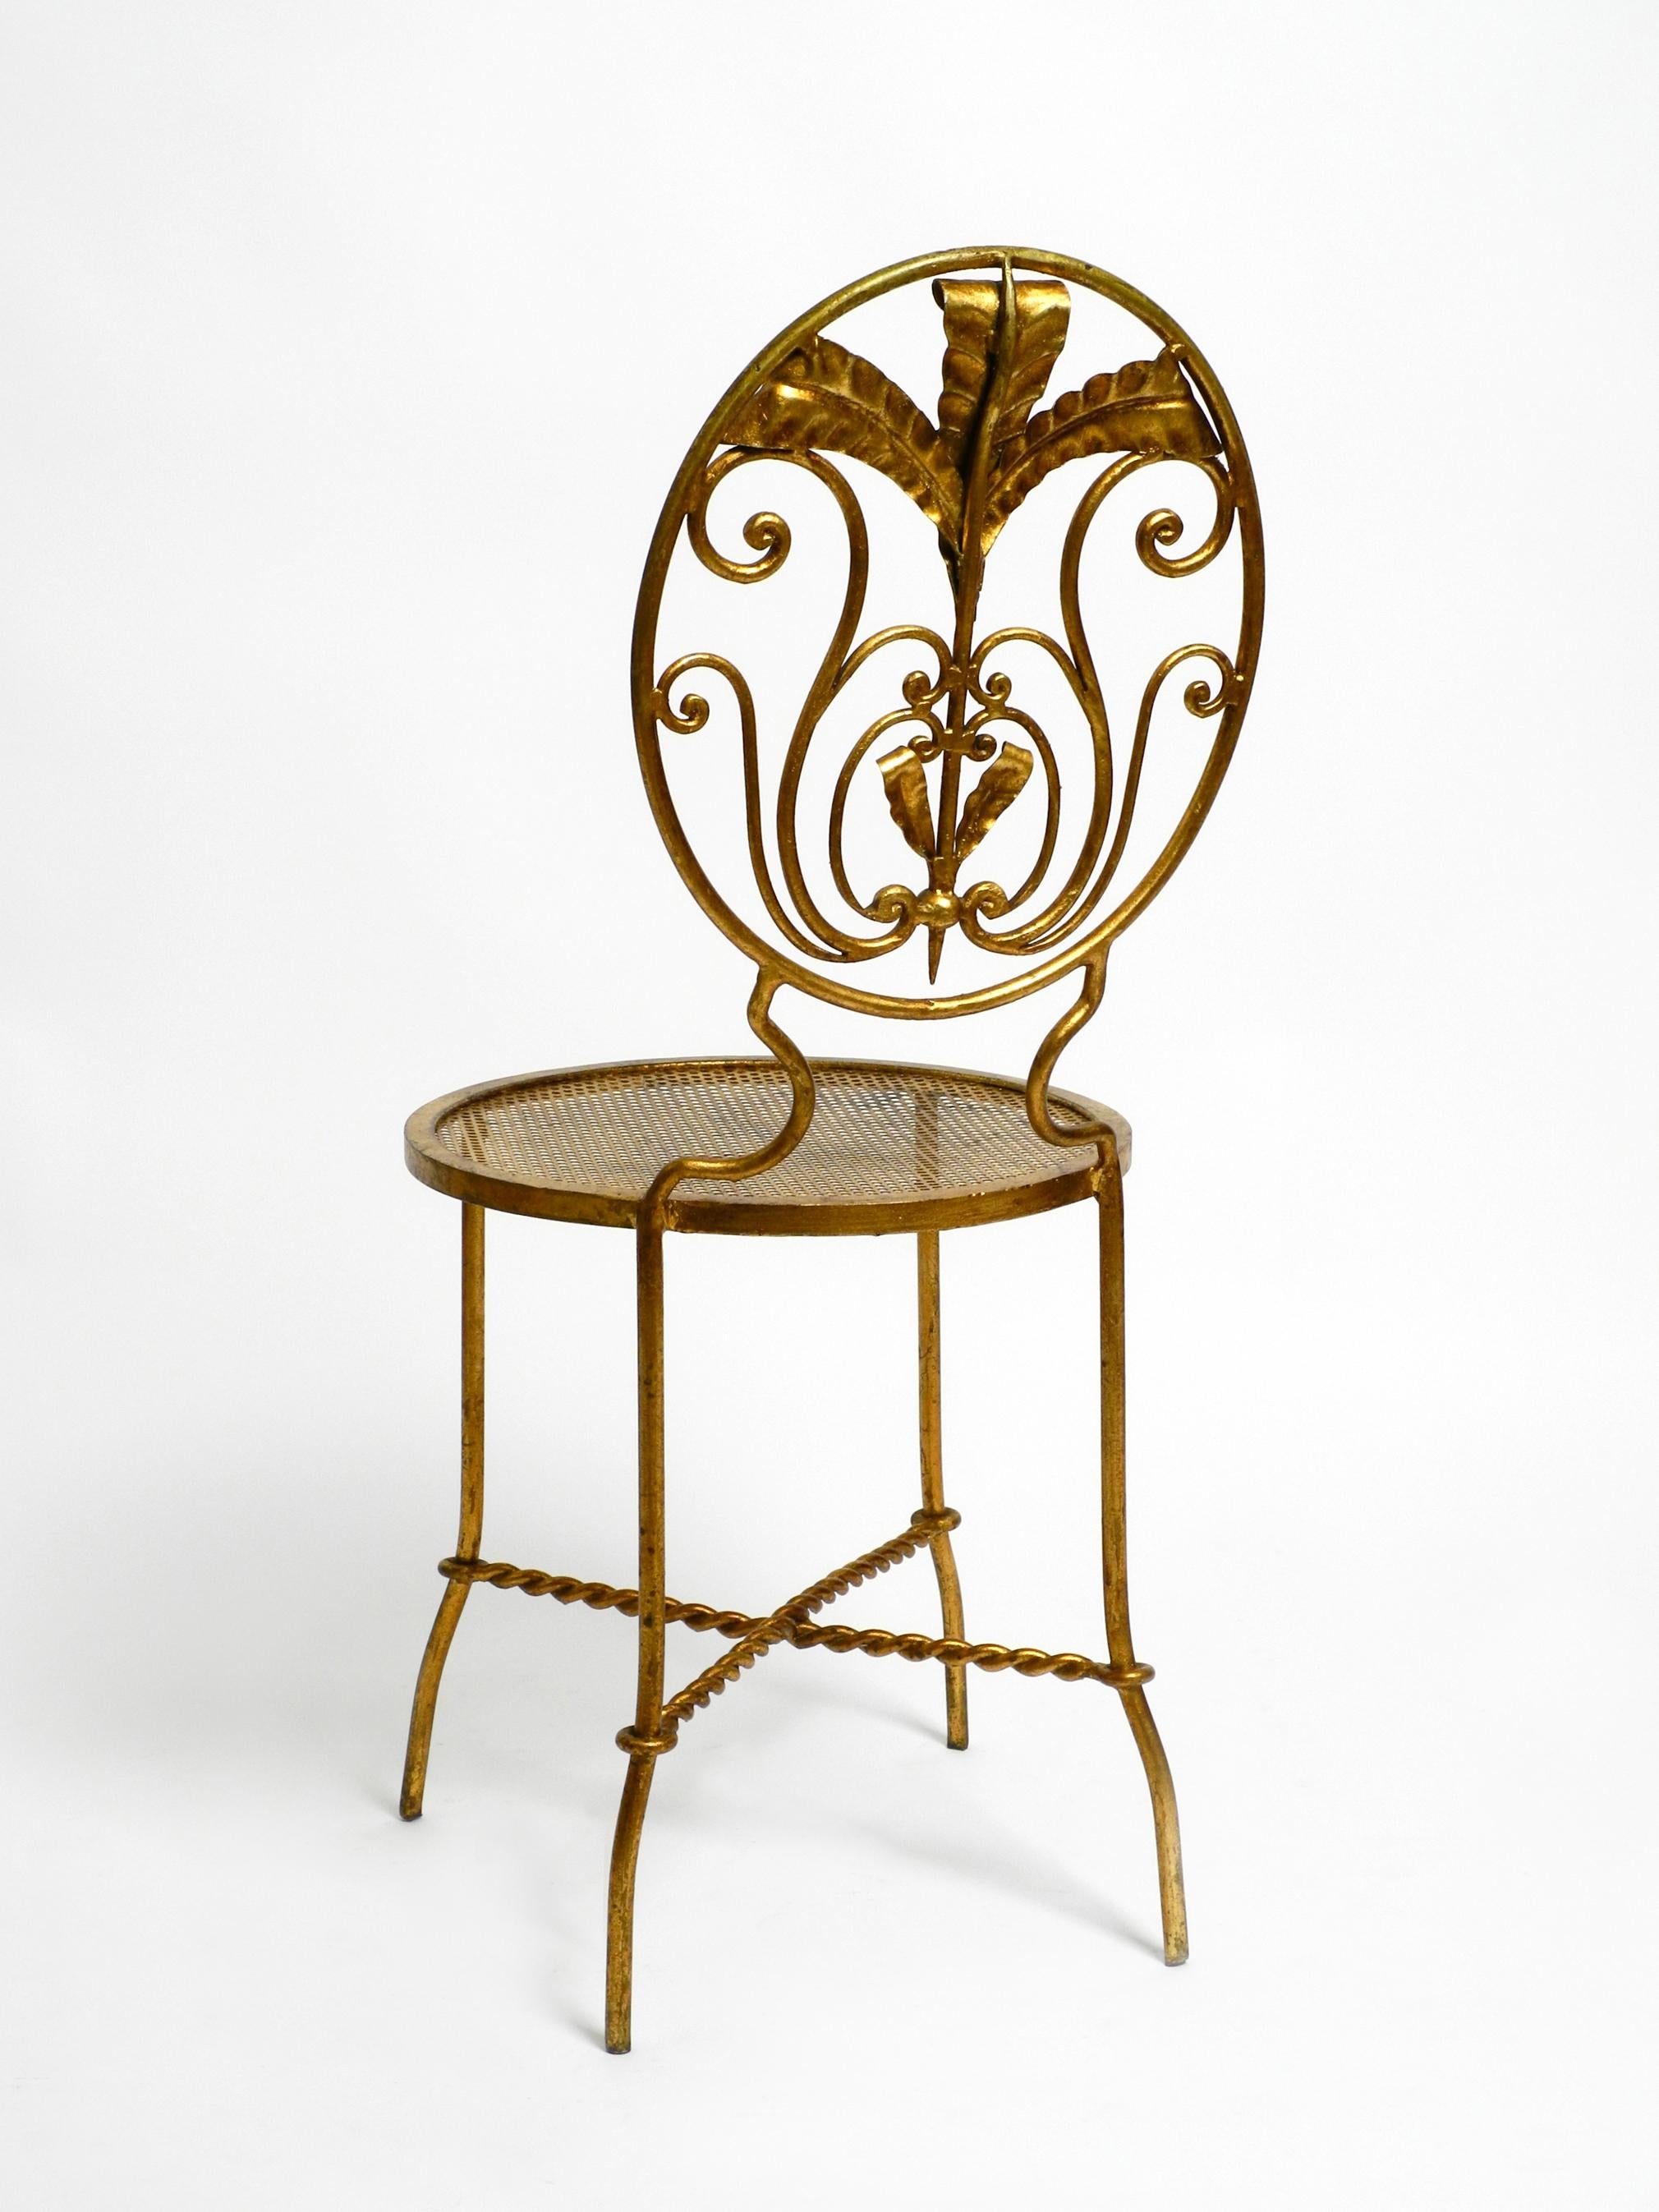 Late 20th Century Beautiful Italian 70's Regency Design Gold Plated Wrought Iron Chair For Sale